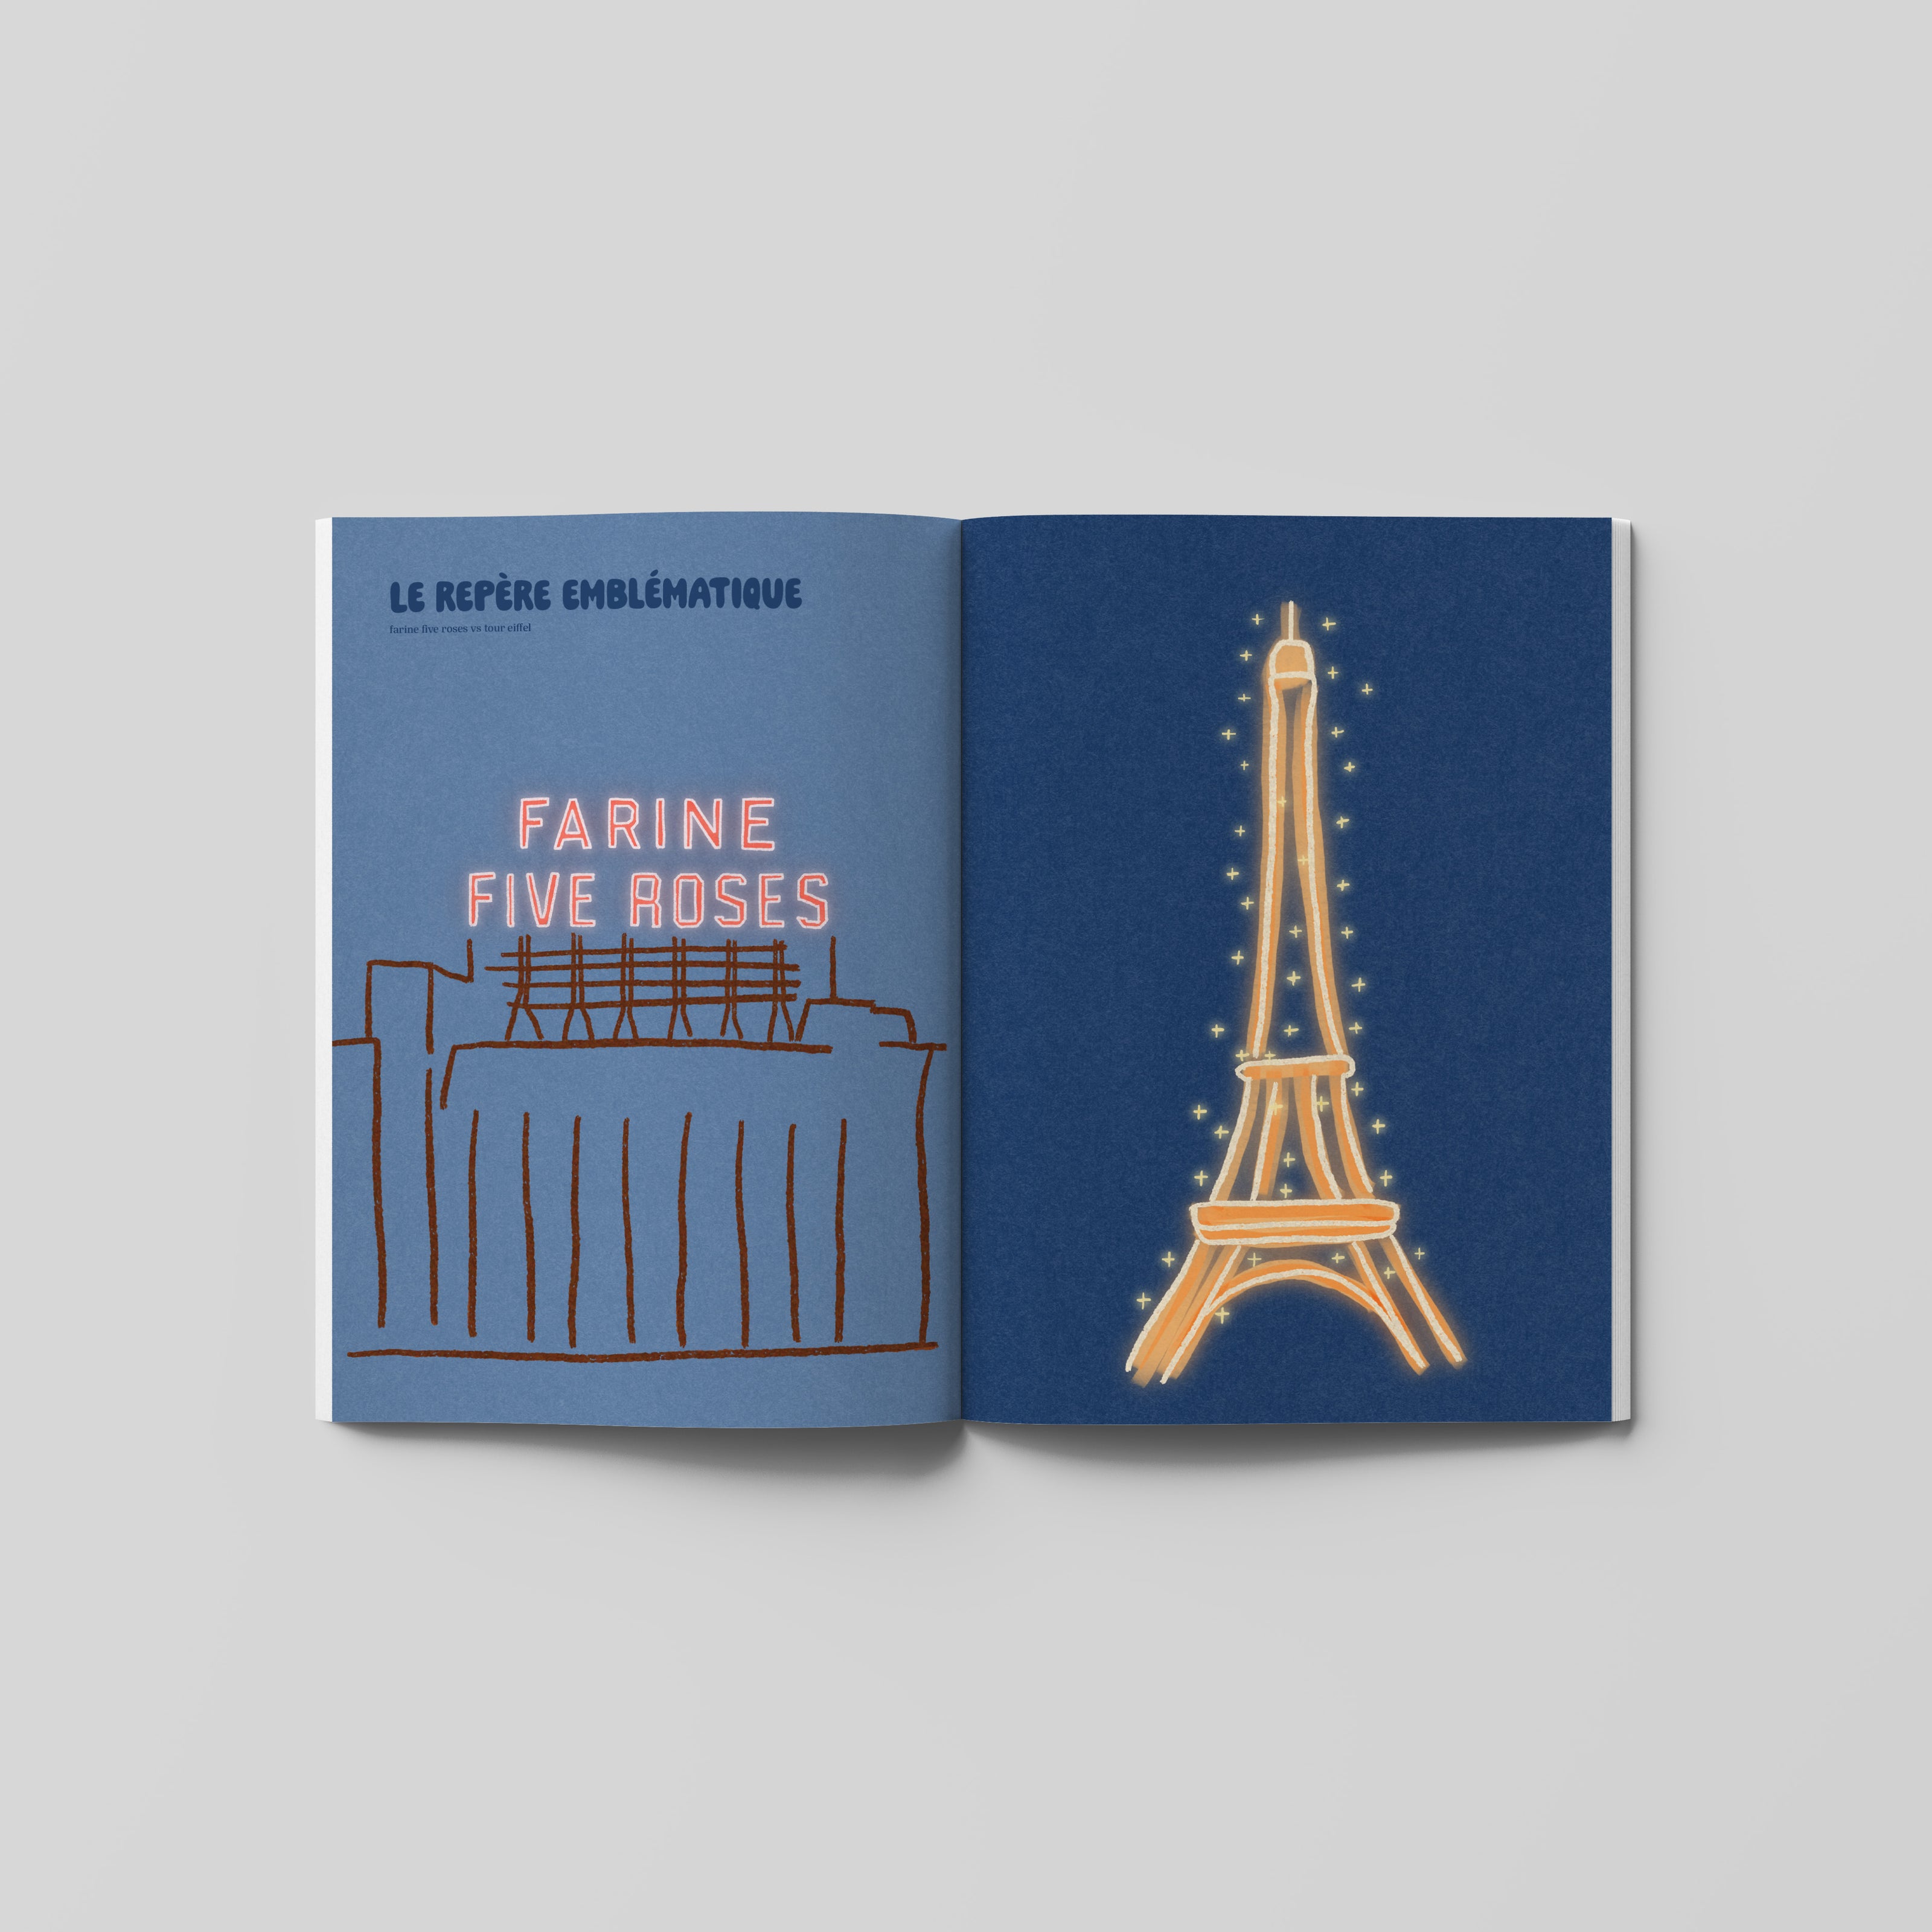 Montreal vs Paris by Alizee Castel opened on "The iconic landmark" page spread showing a comparison of Montreal's "Farine Five Roses" sign vs Paris' Eiffel Tower